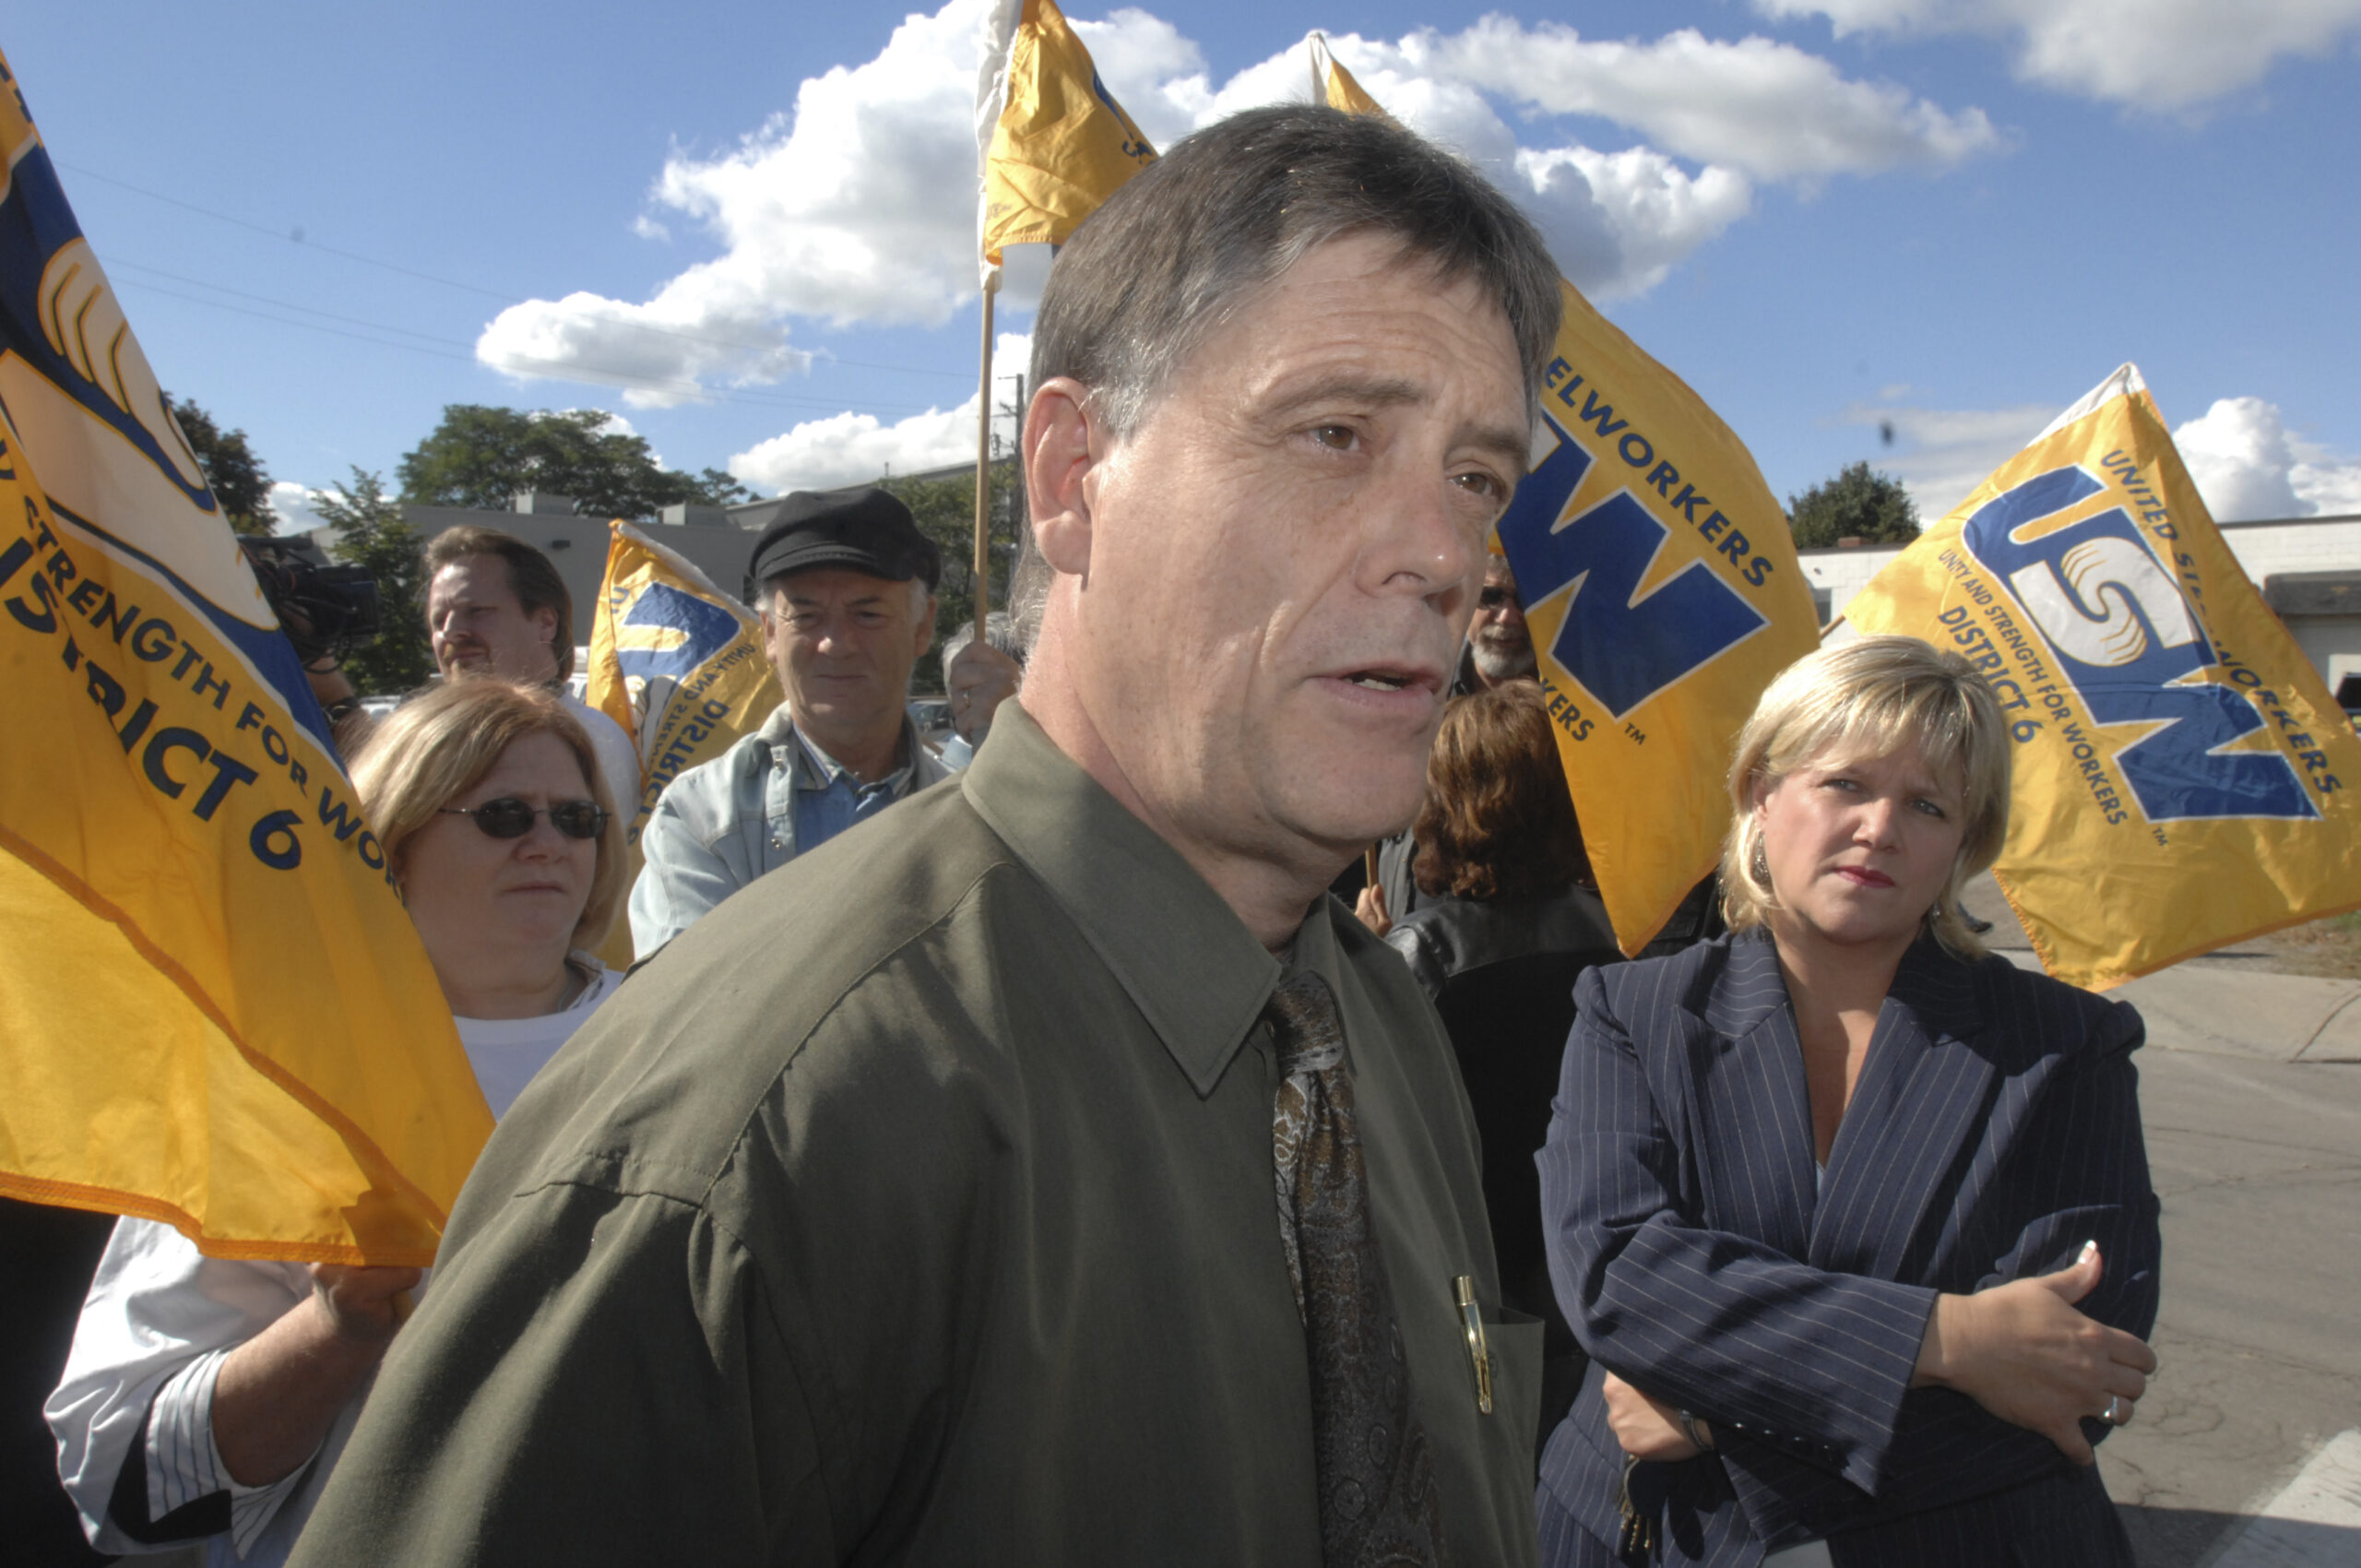 NDP MPP Paul Miller booted from caucus